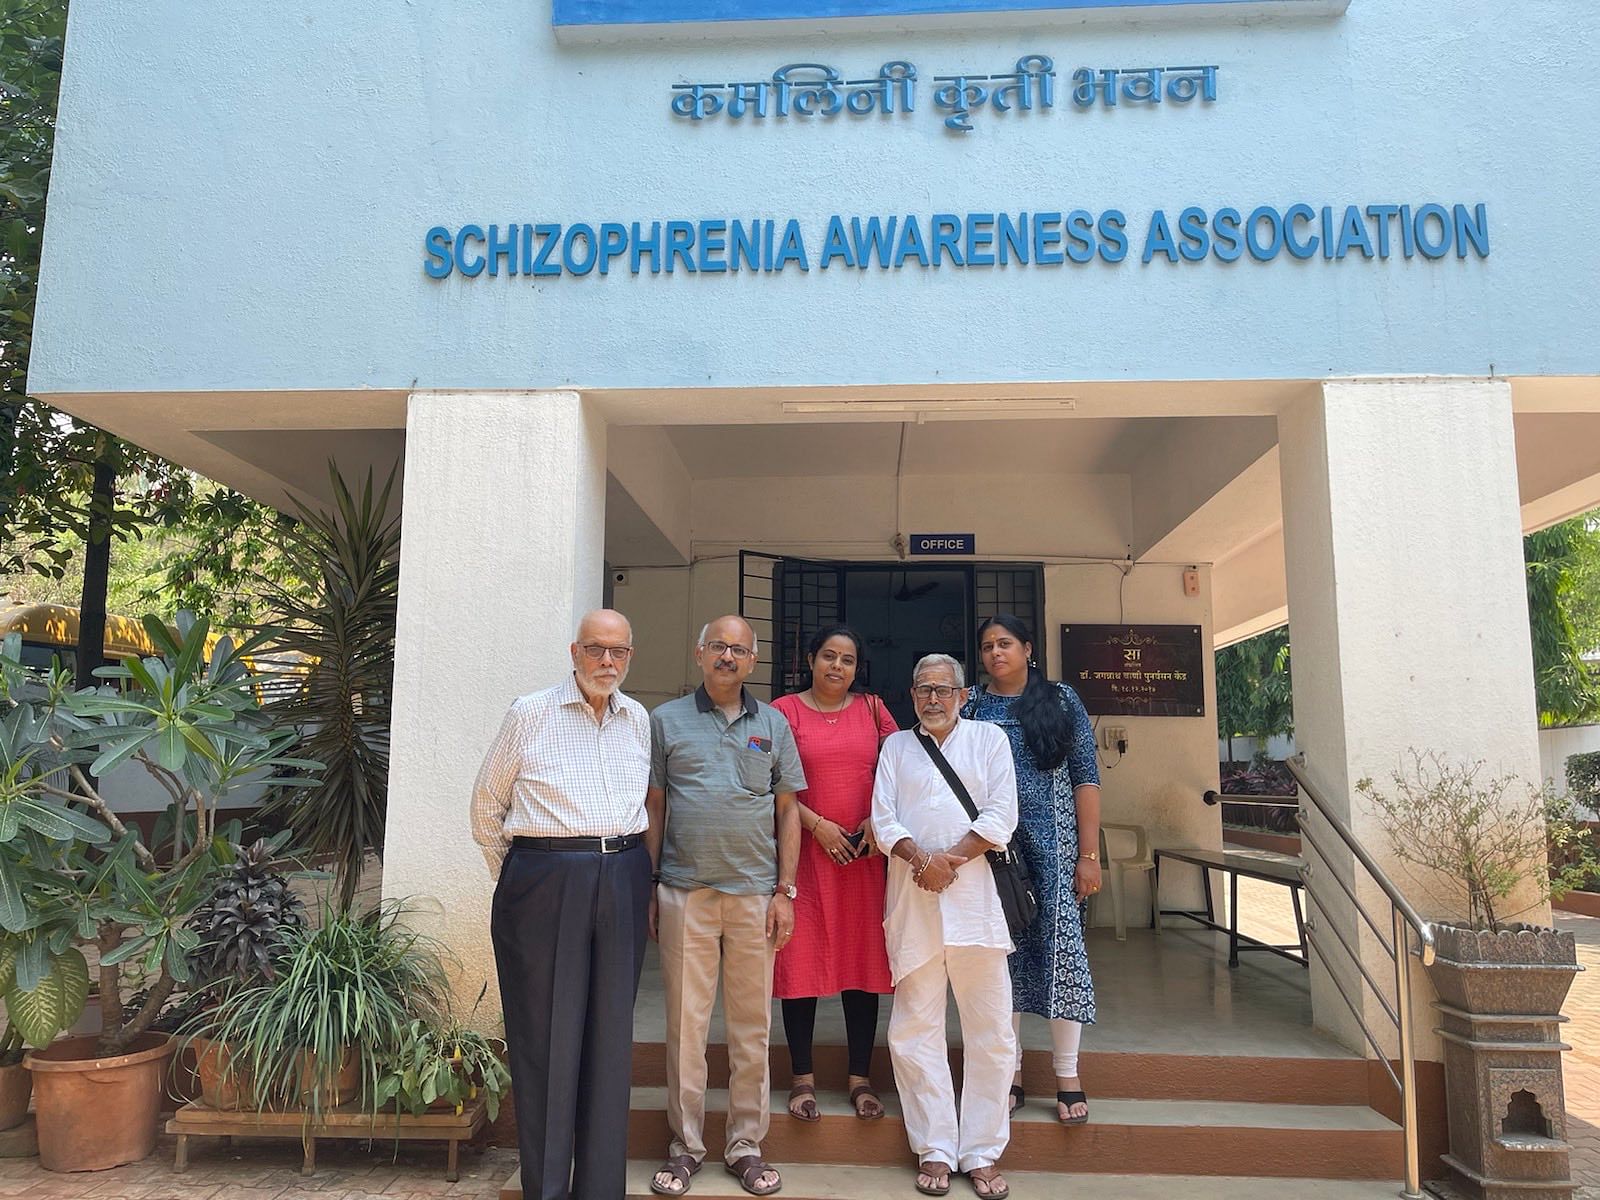 Amrit Bakhshy (far left) at the Schizophrenia Awareness Association, of which he is president | Photo: via X/@amritbakhshy